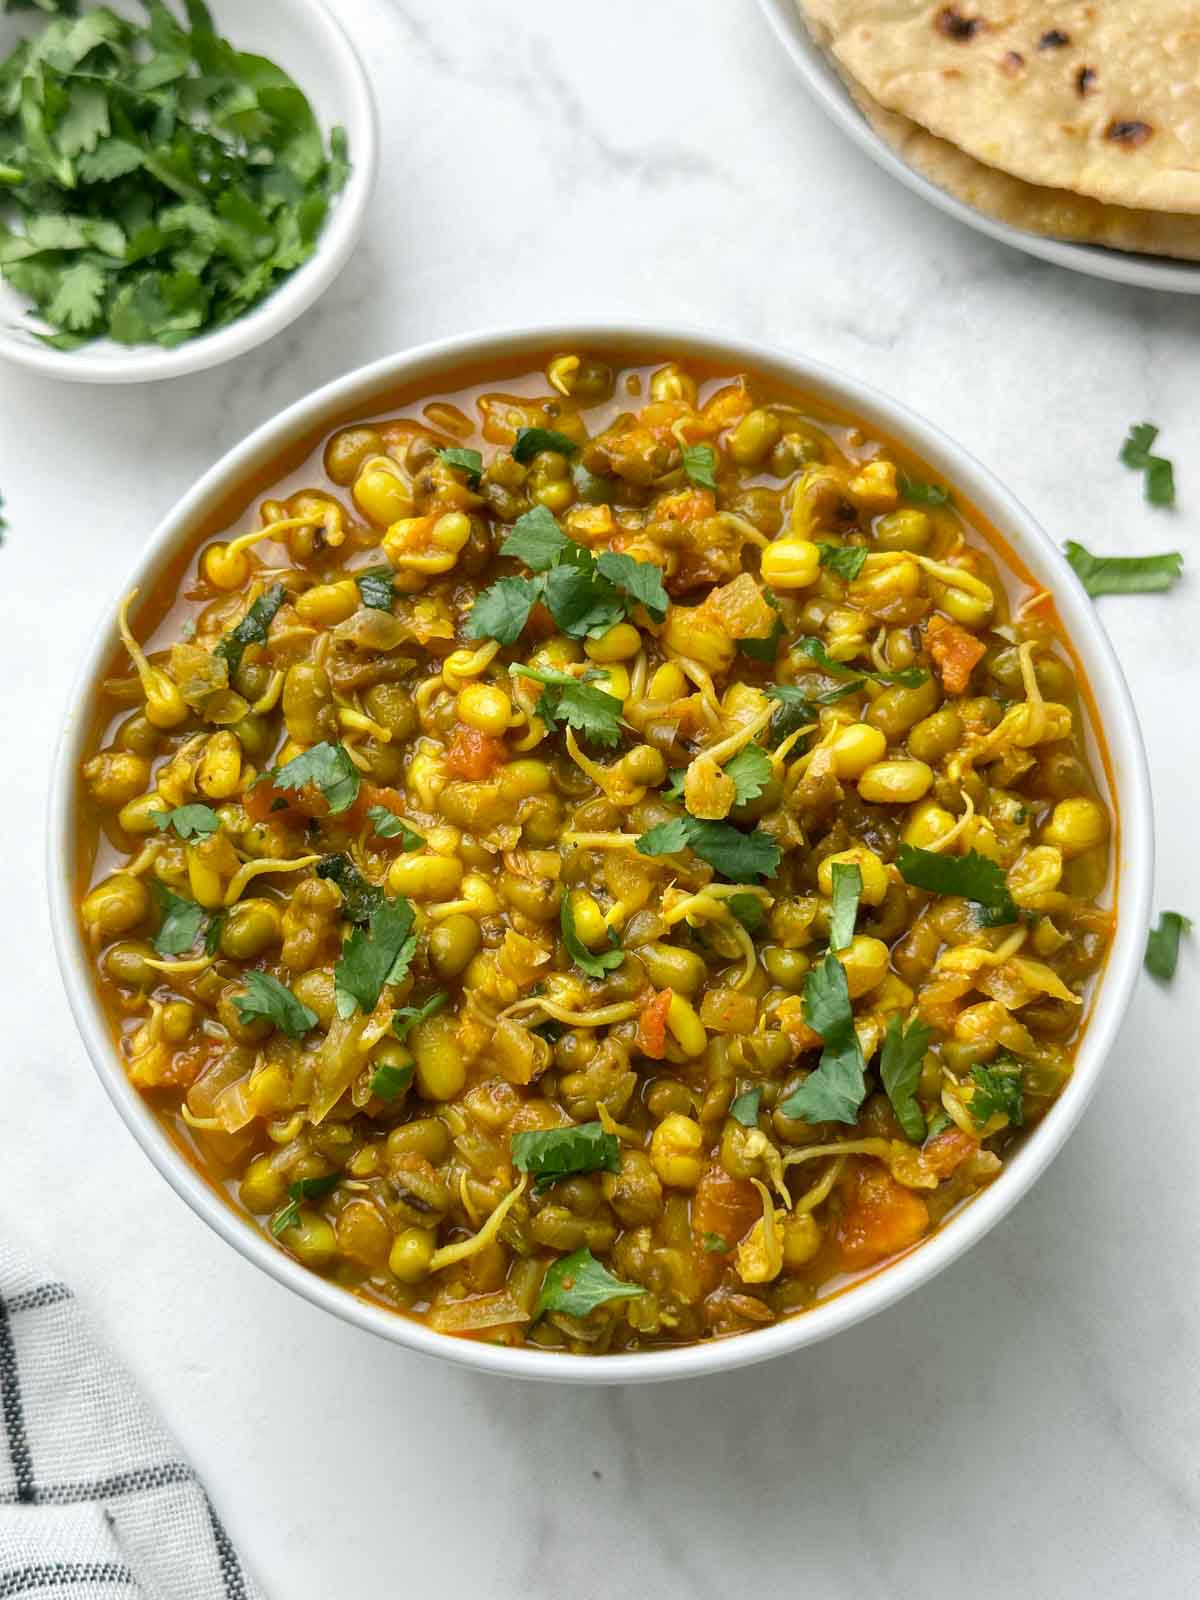 sprout moong curry served in a bowl with chapati and coriander leaves on the side